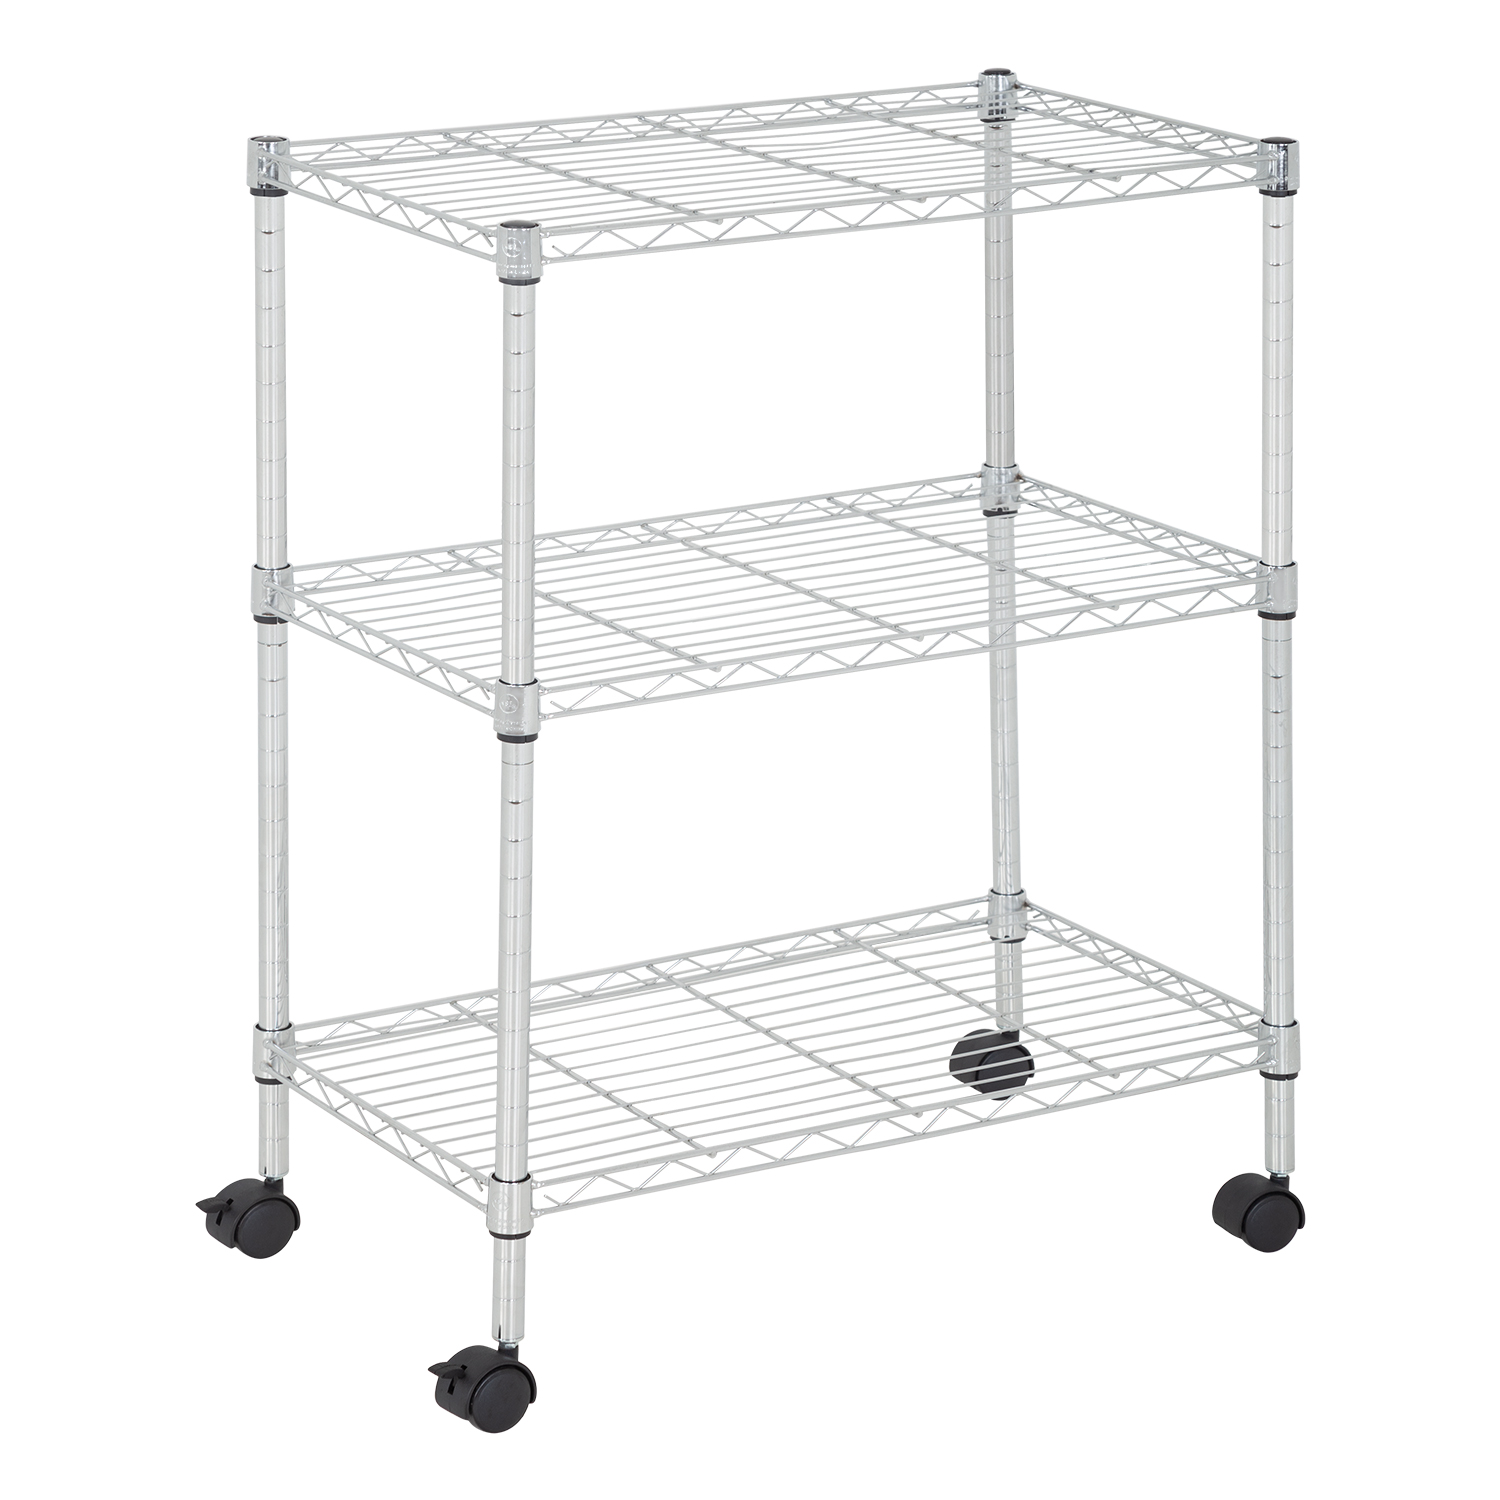 Hyper Tough 3 Tier Multipurpose Wire Shelving Rack Chrome Color 750lbs Load Capacity For